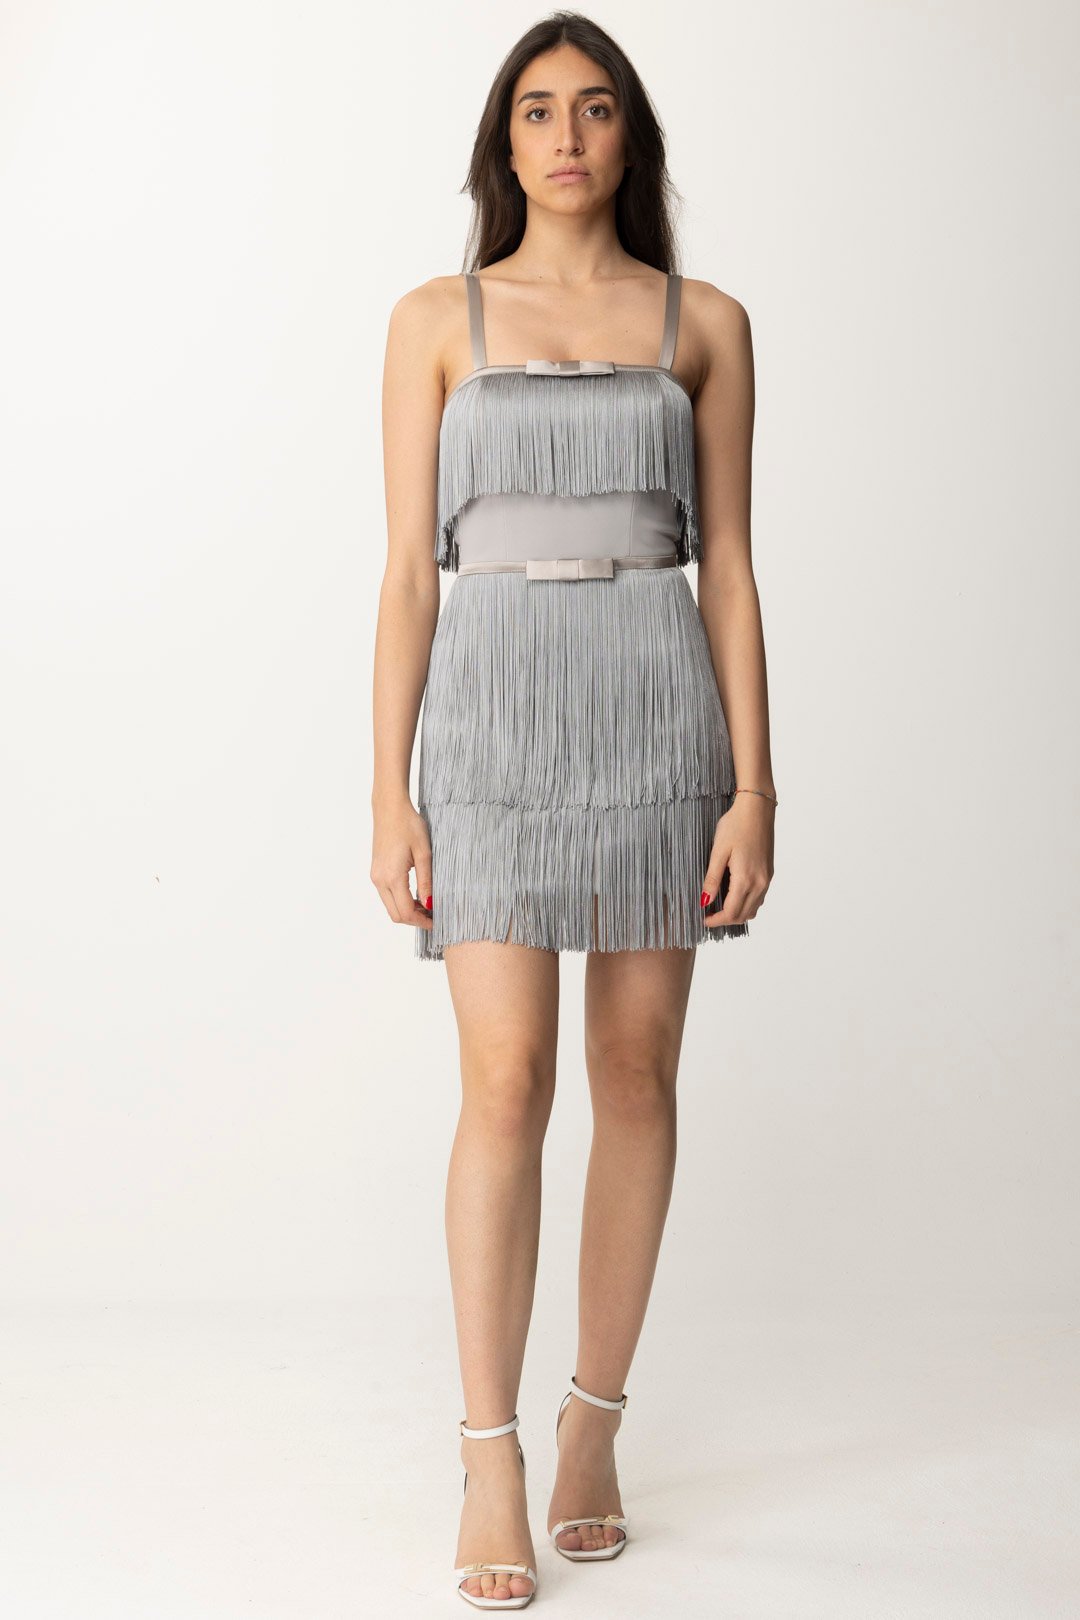 Preview: Elisabetta Franchi Mini Dress with Fringes and Bows Perla